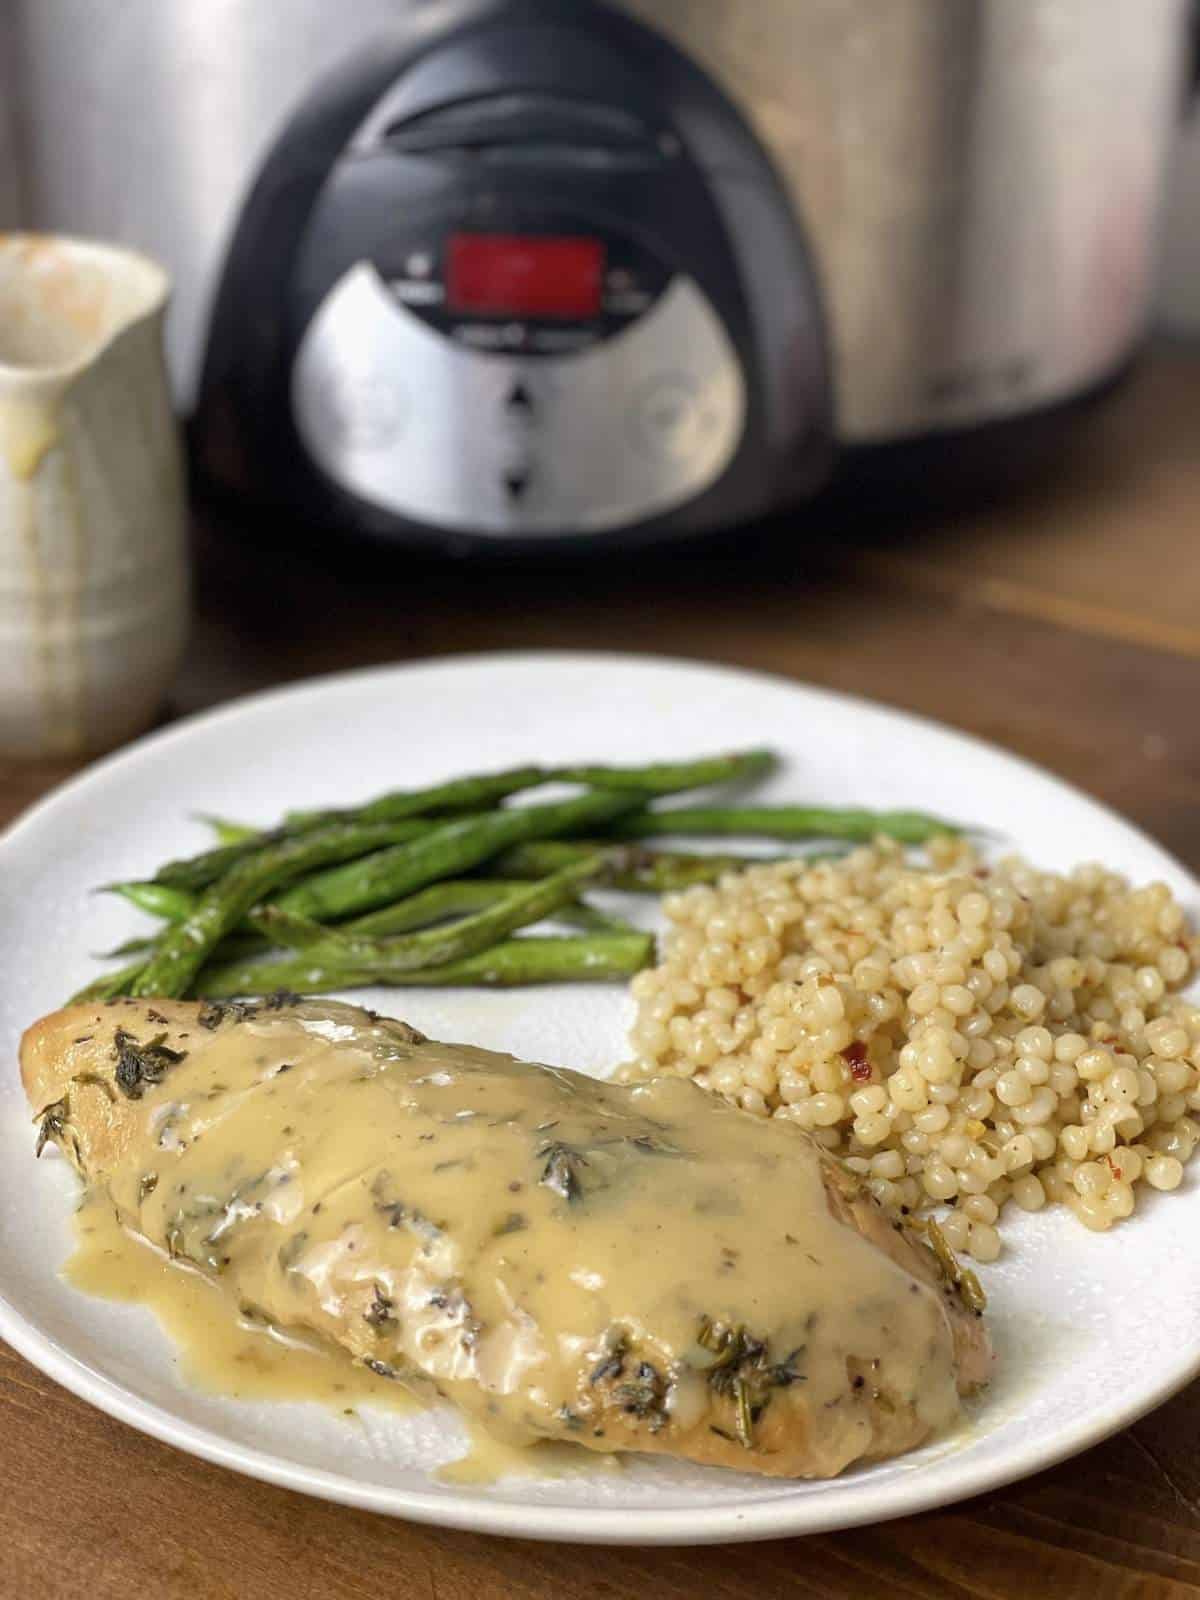 A cooked turkey tenderloin with Israeli couscous and green beans on a plate in front of a crockpot.